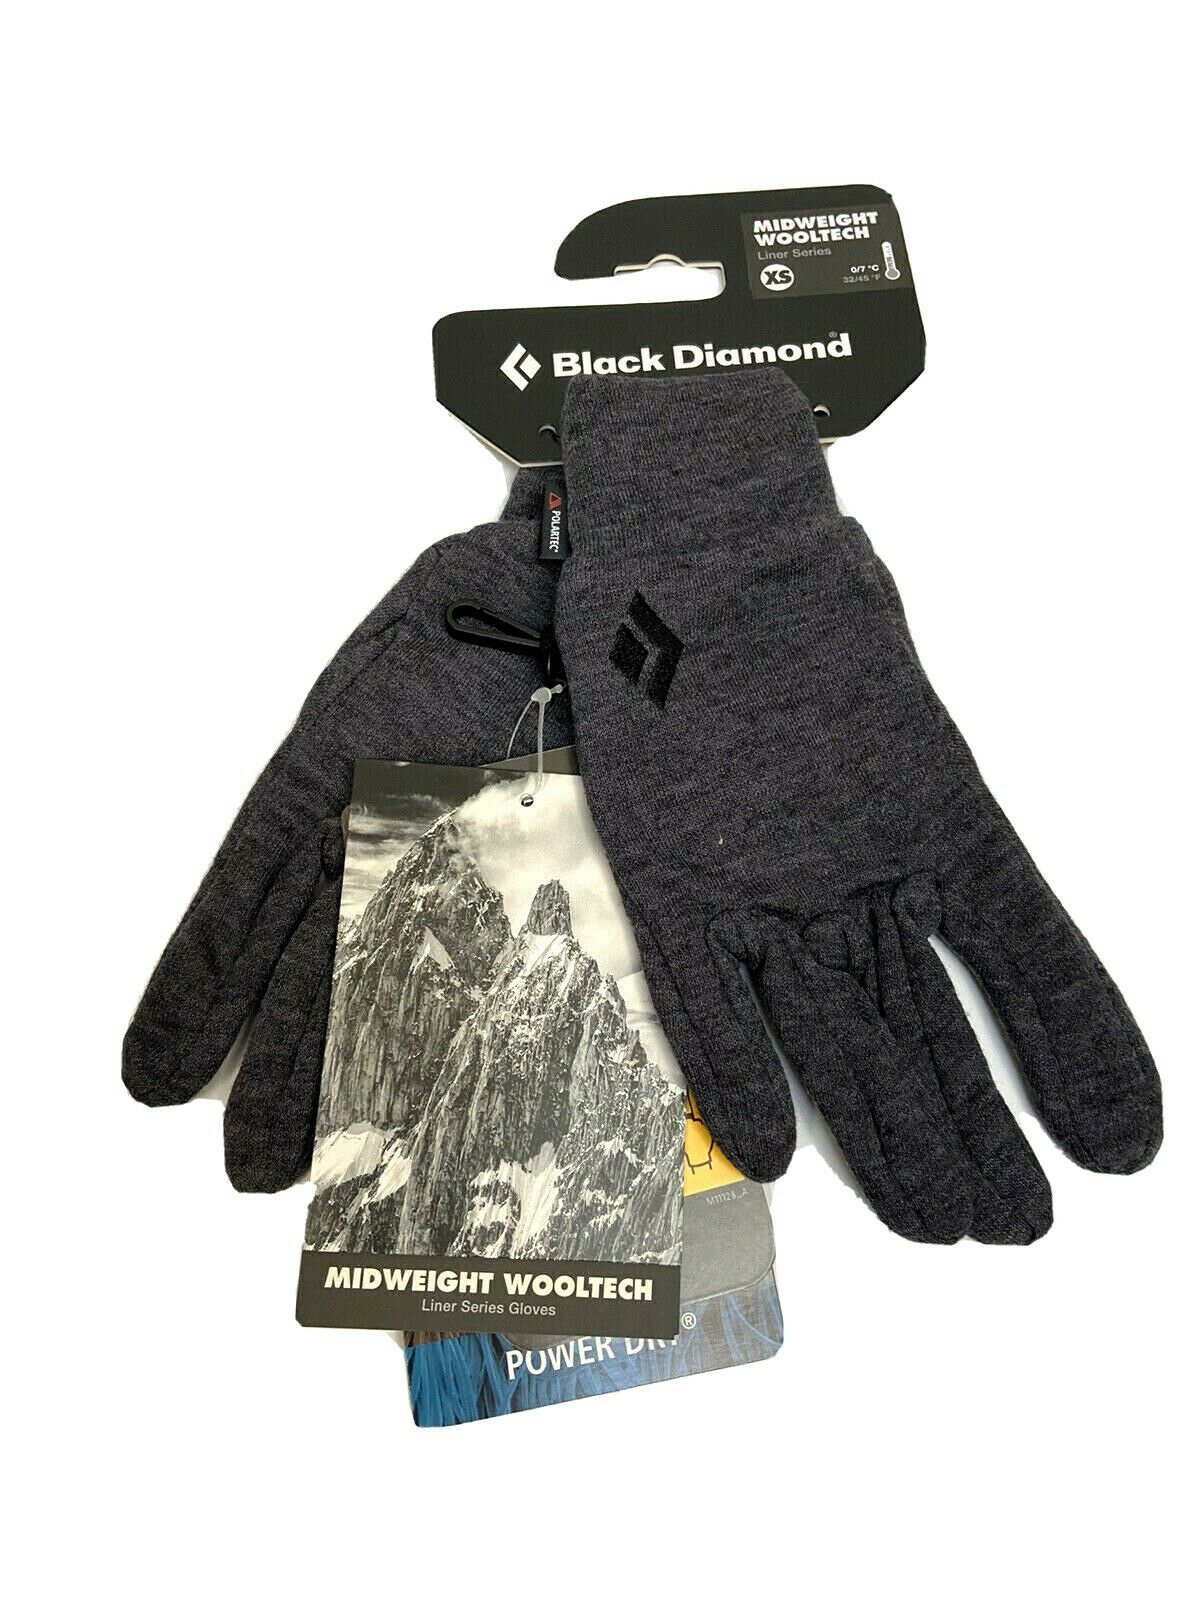 Black Diamond Midweight Wooltech Gloves Xs S Polartec Leather Palm Hiking New